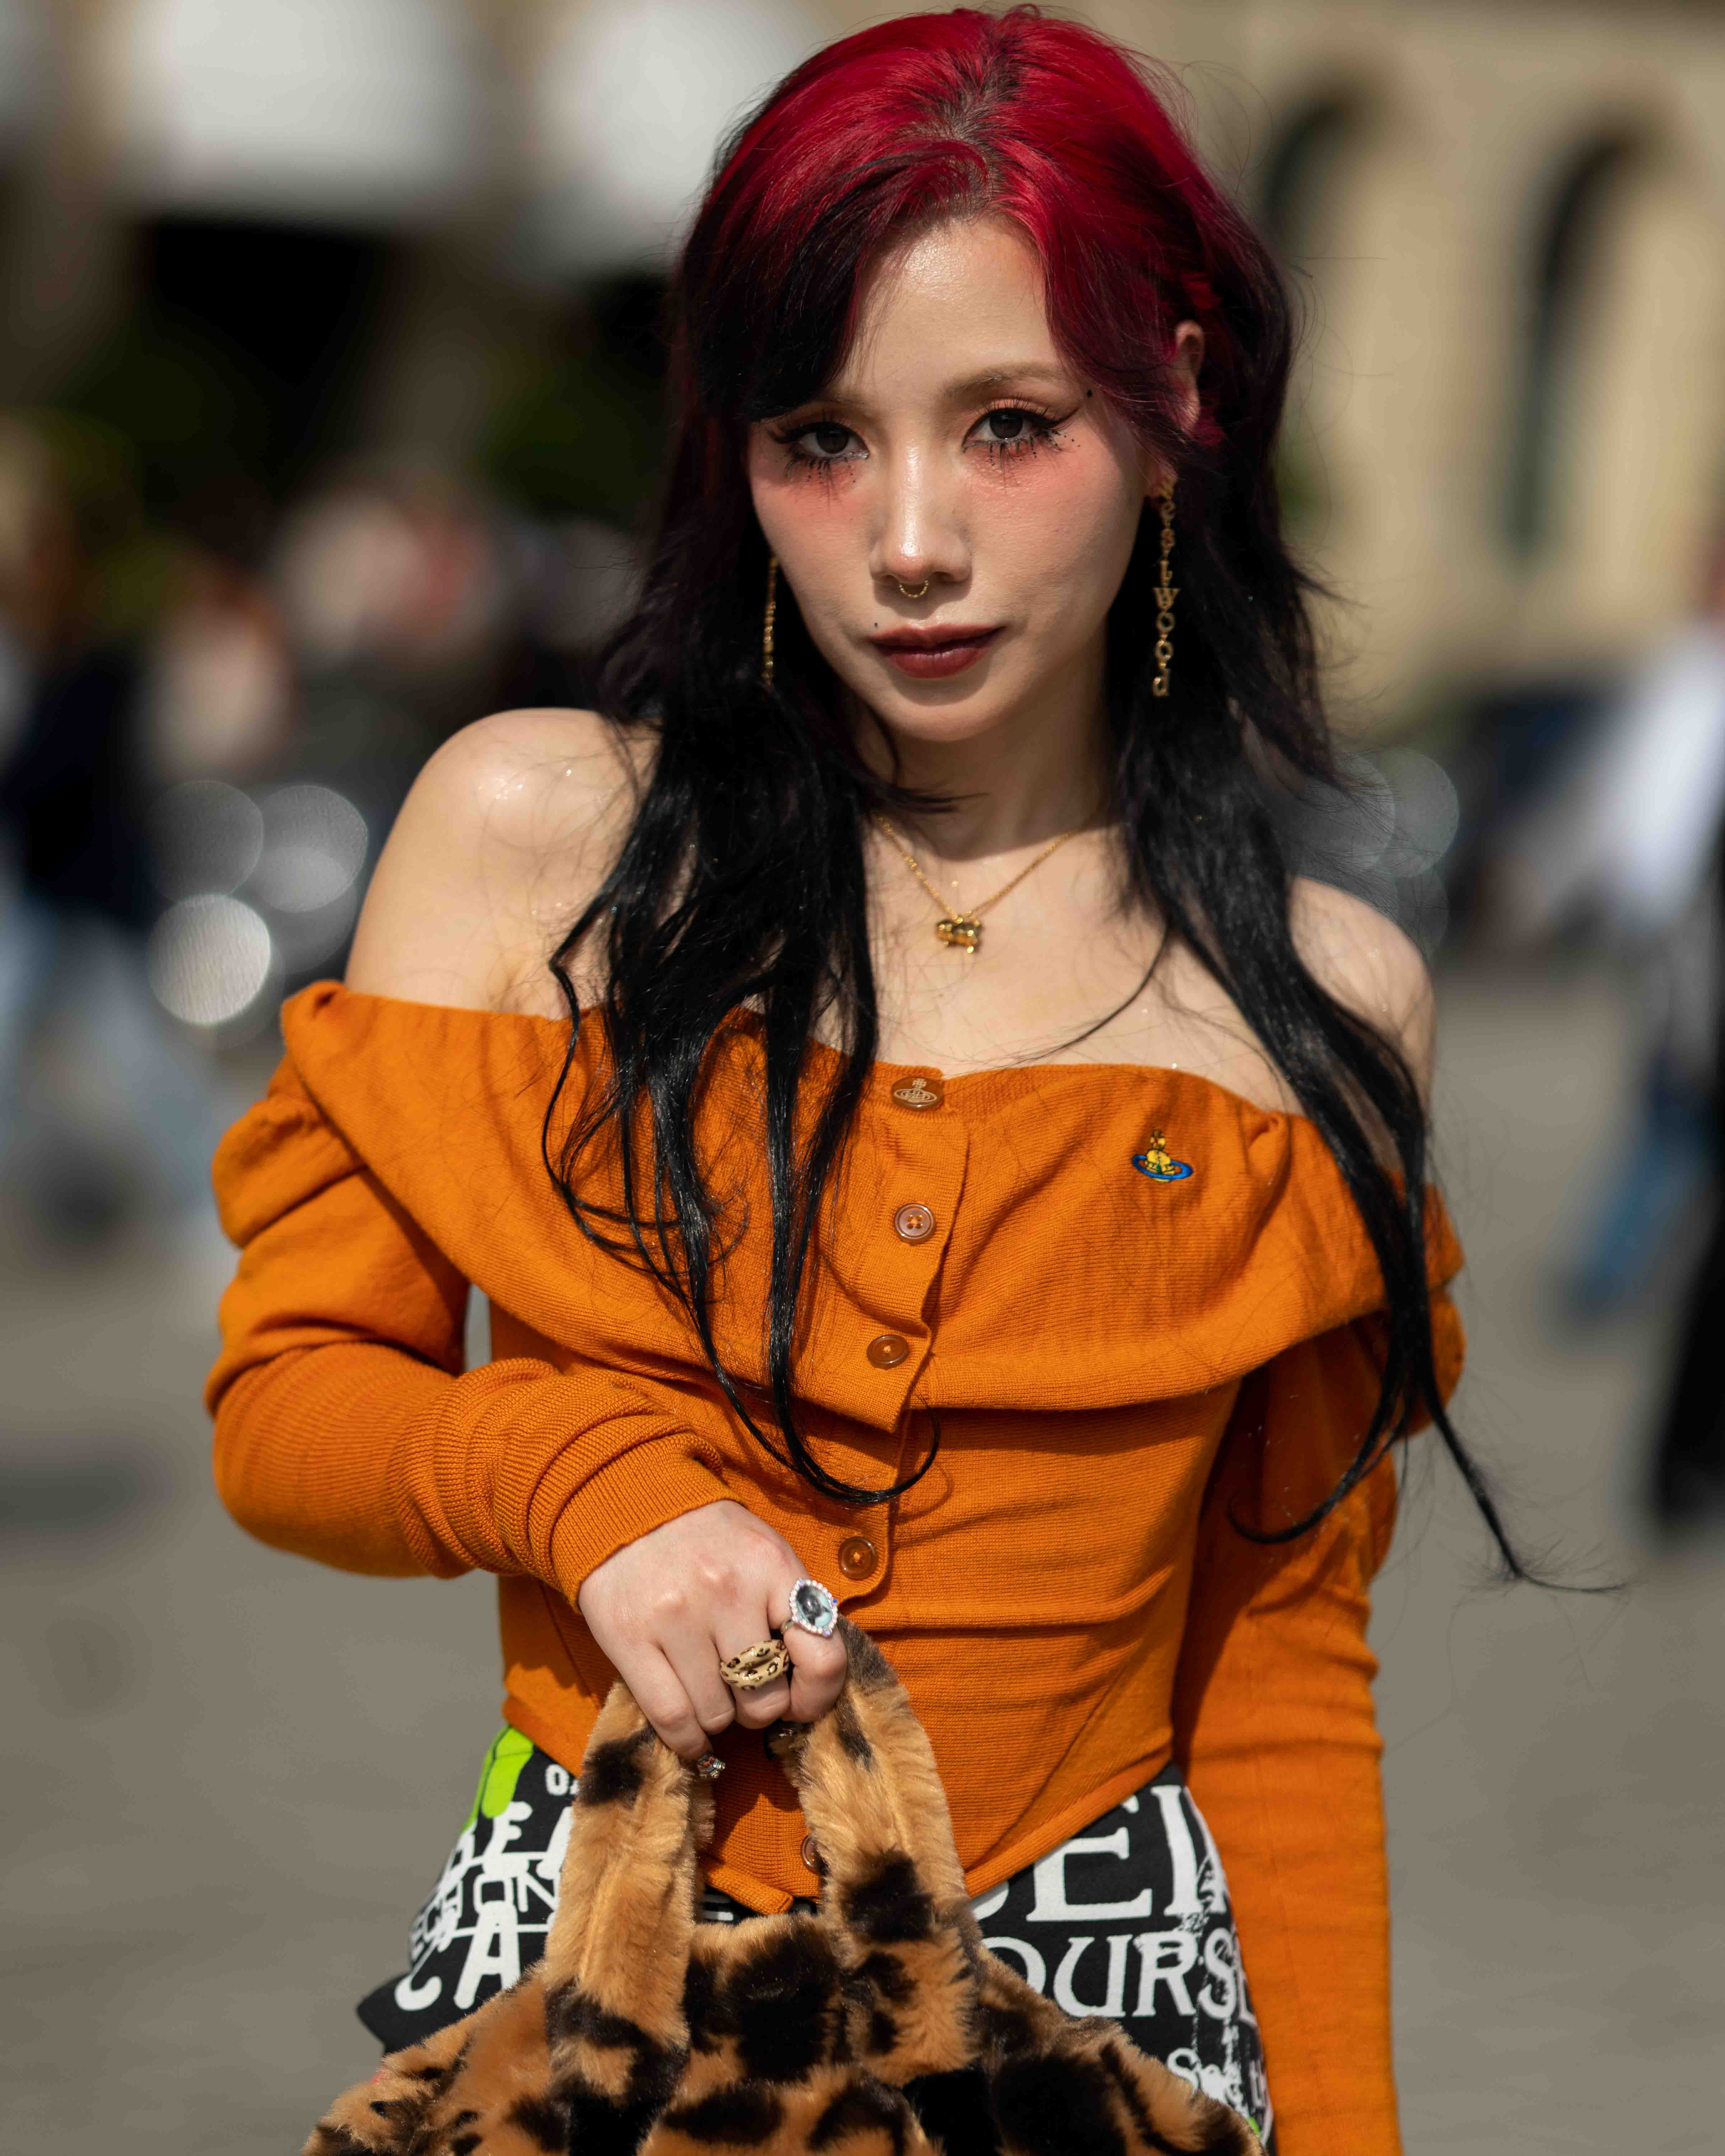 Riisa Naka 仲里依紗 Street Style At Andreas Kronthaler For Vivienne Westwood SS24 Paris Fashion Week.  The Japanese actress is wearing an orange top, leopard print bag and gold accessories.